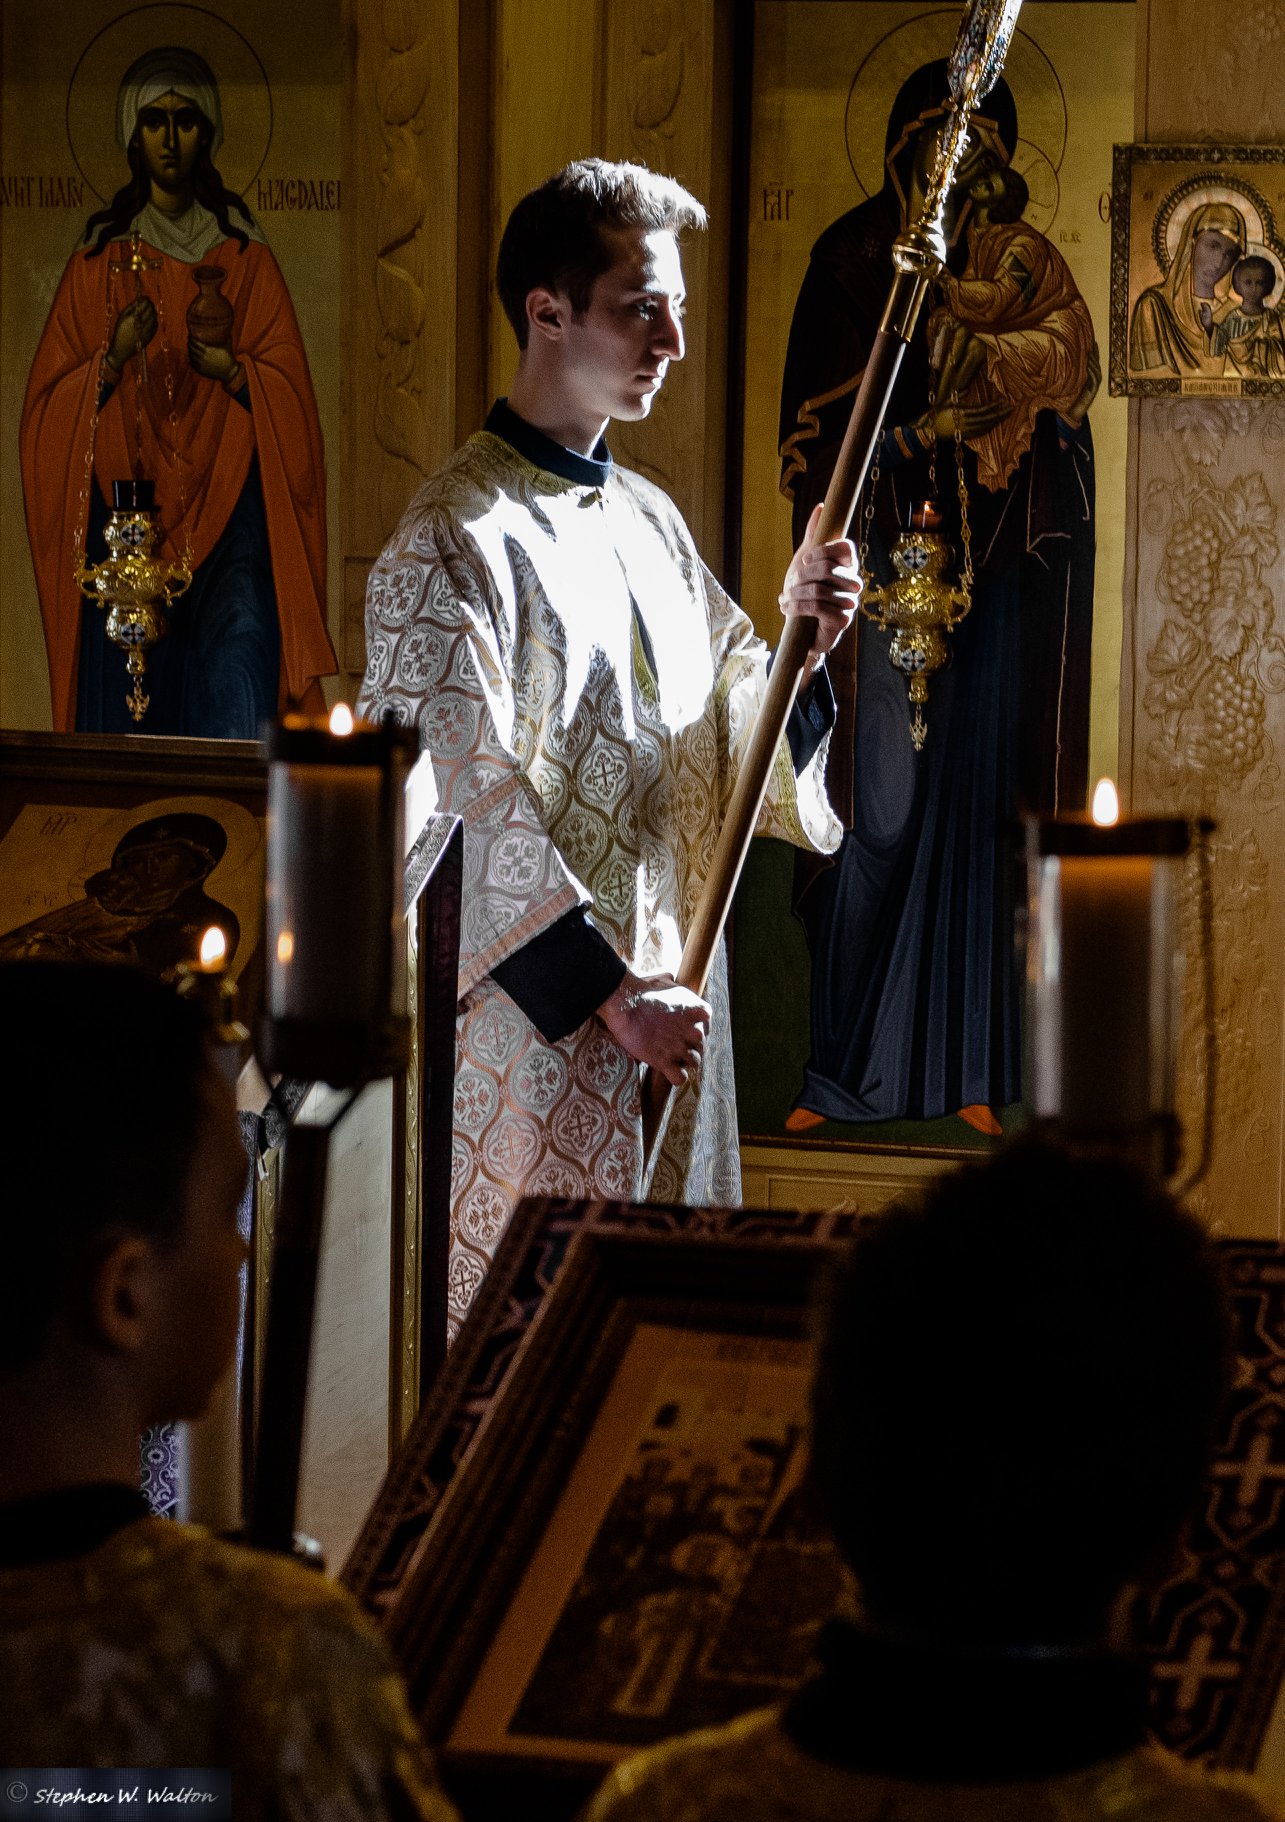  altar server holding processional fan in low light 